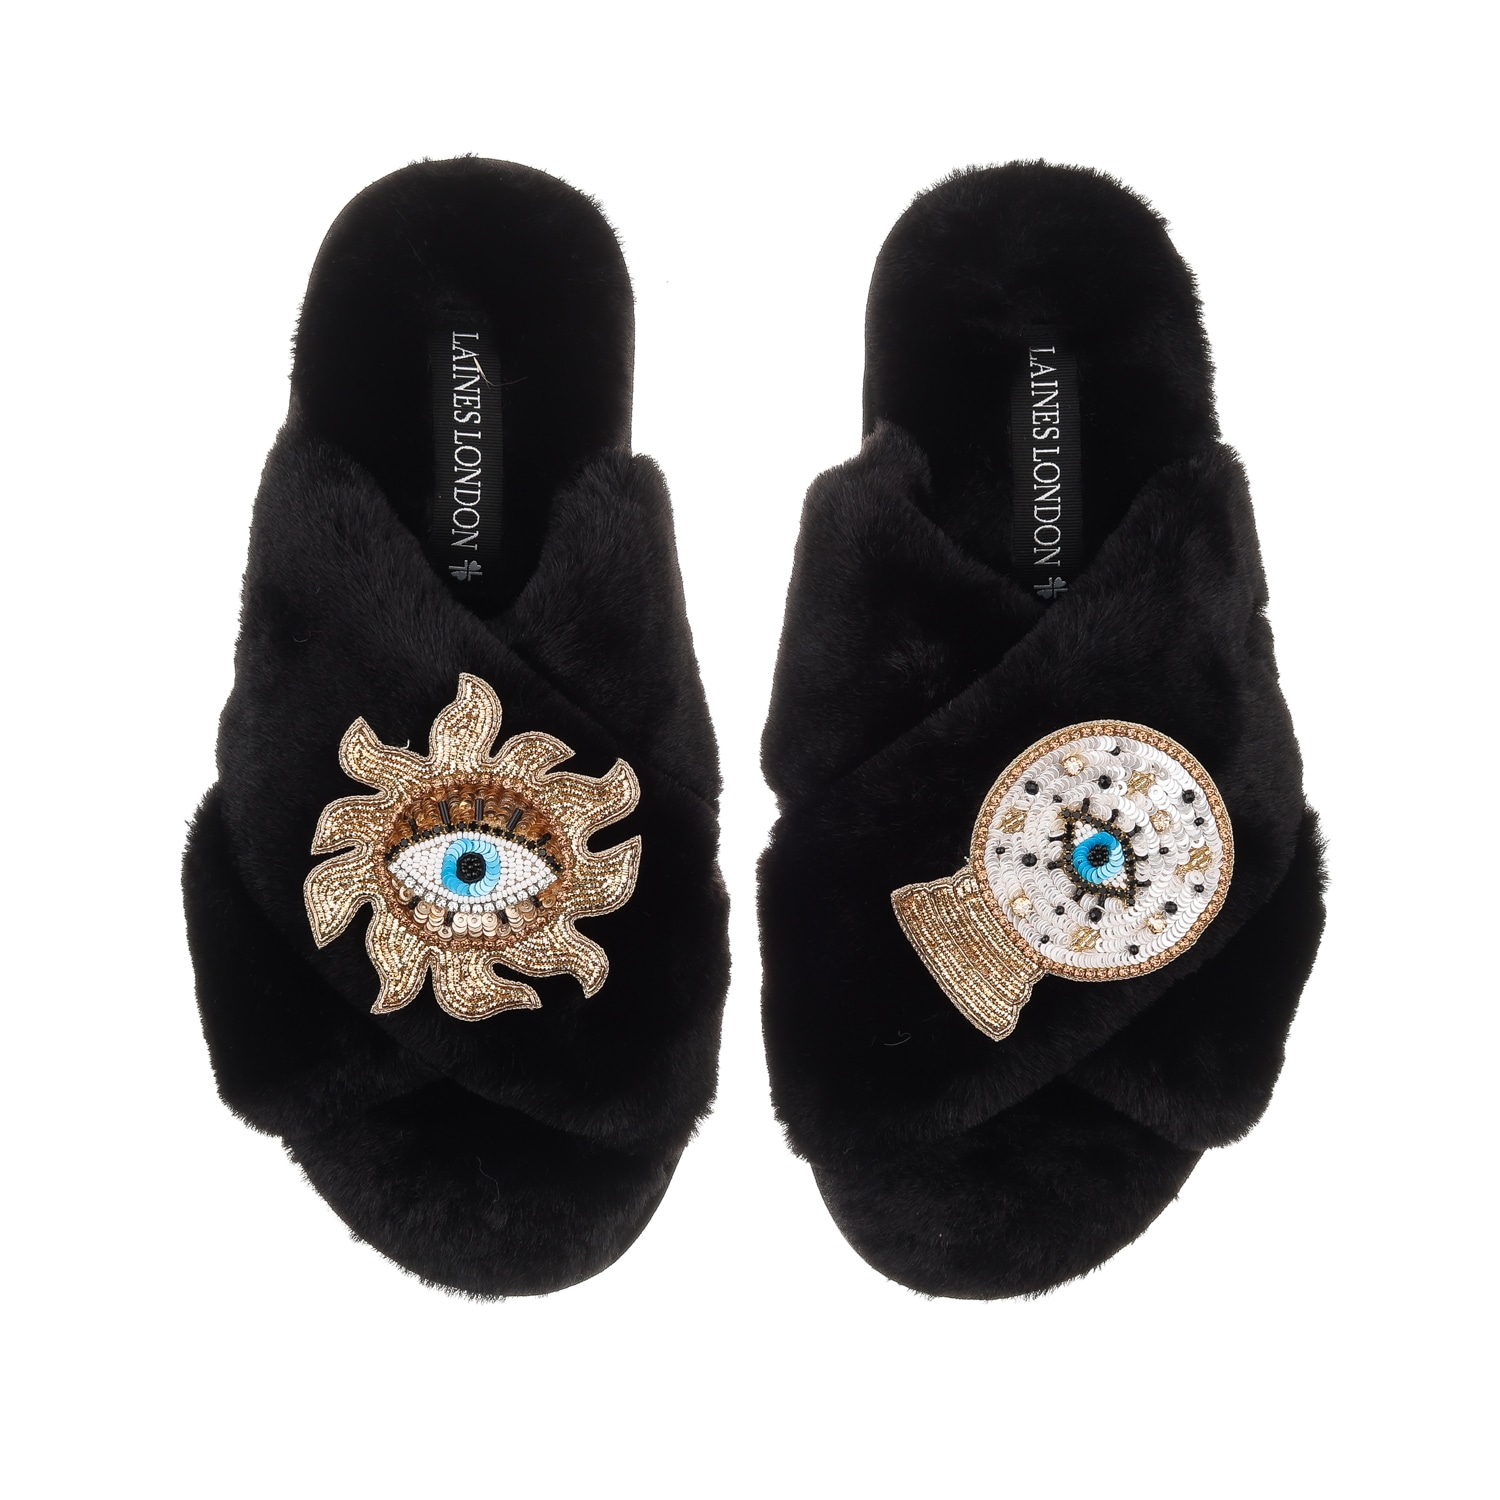 Laines London Women's Classic Laines Slippers With Double Mystic Eye Brooches - Black